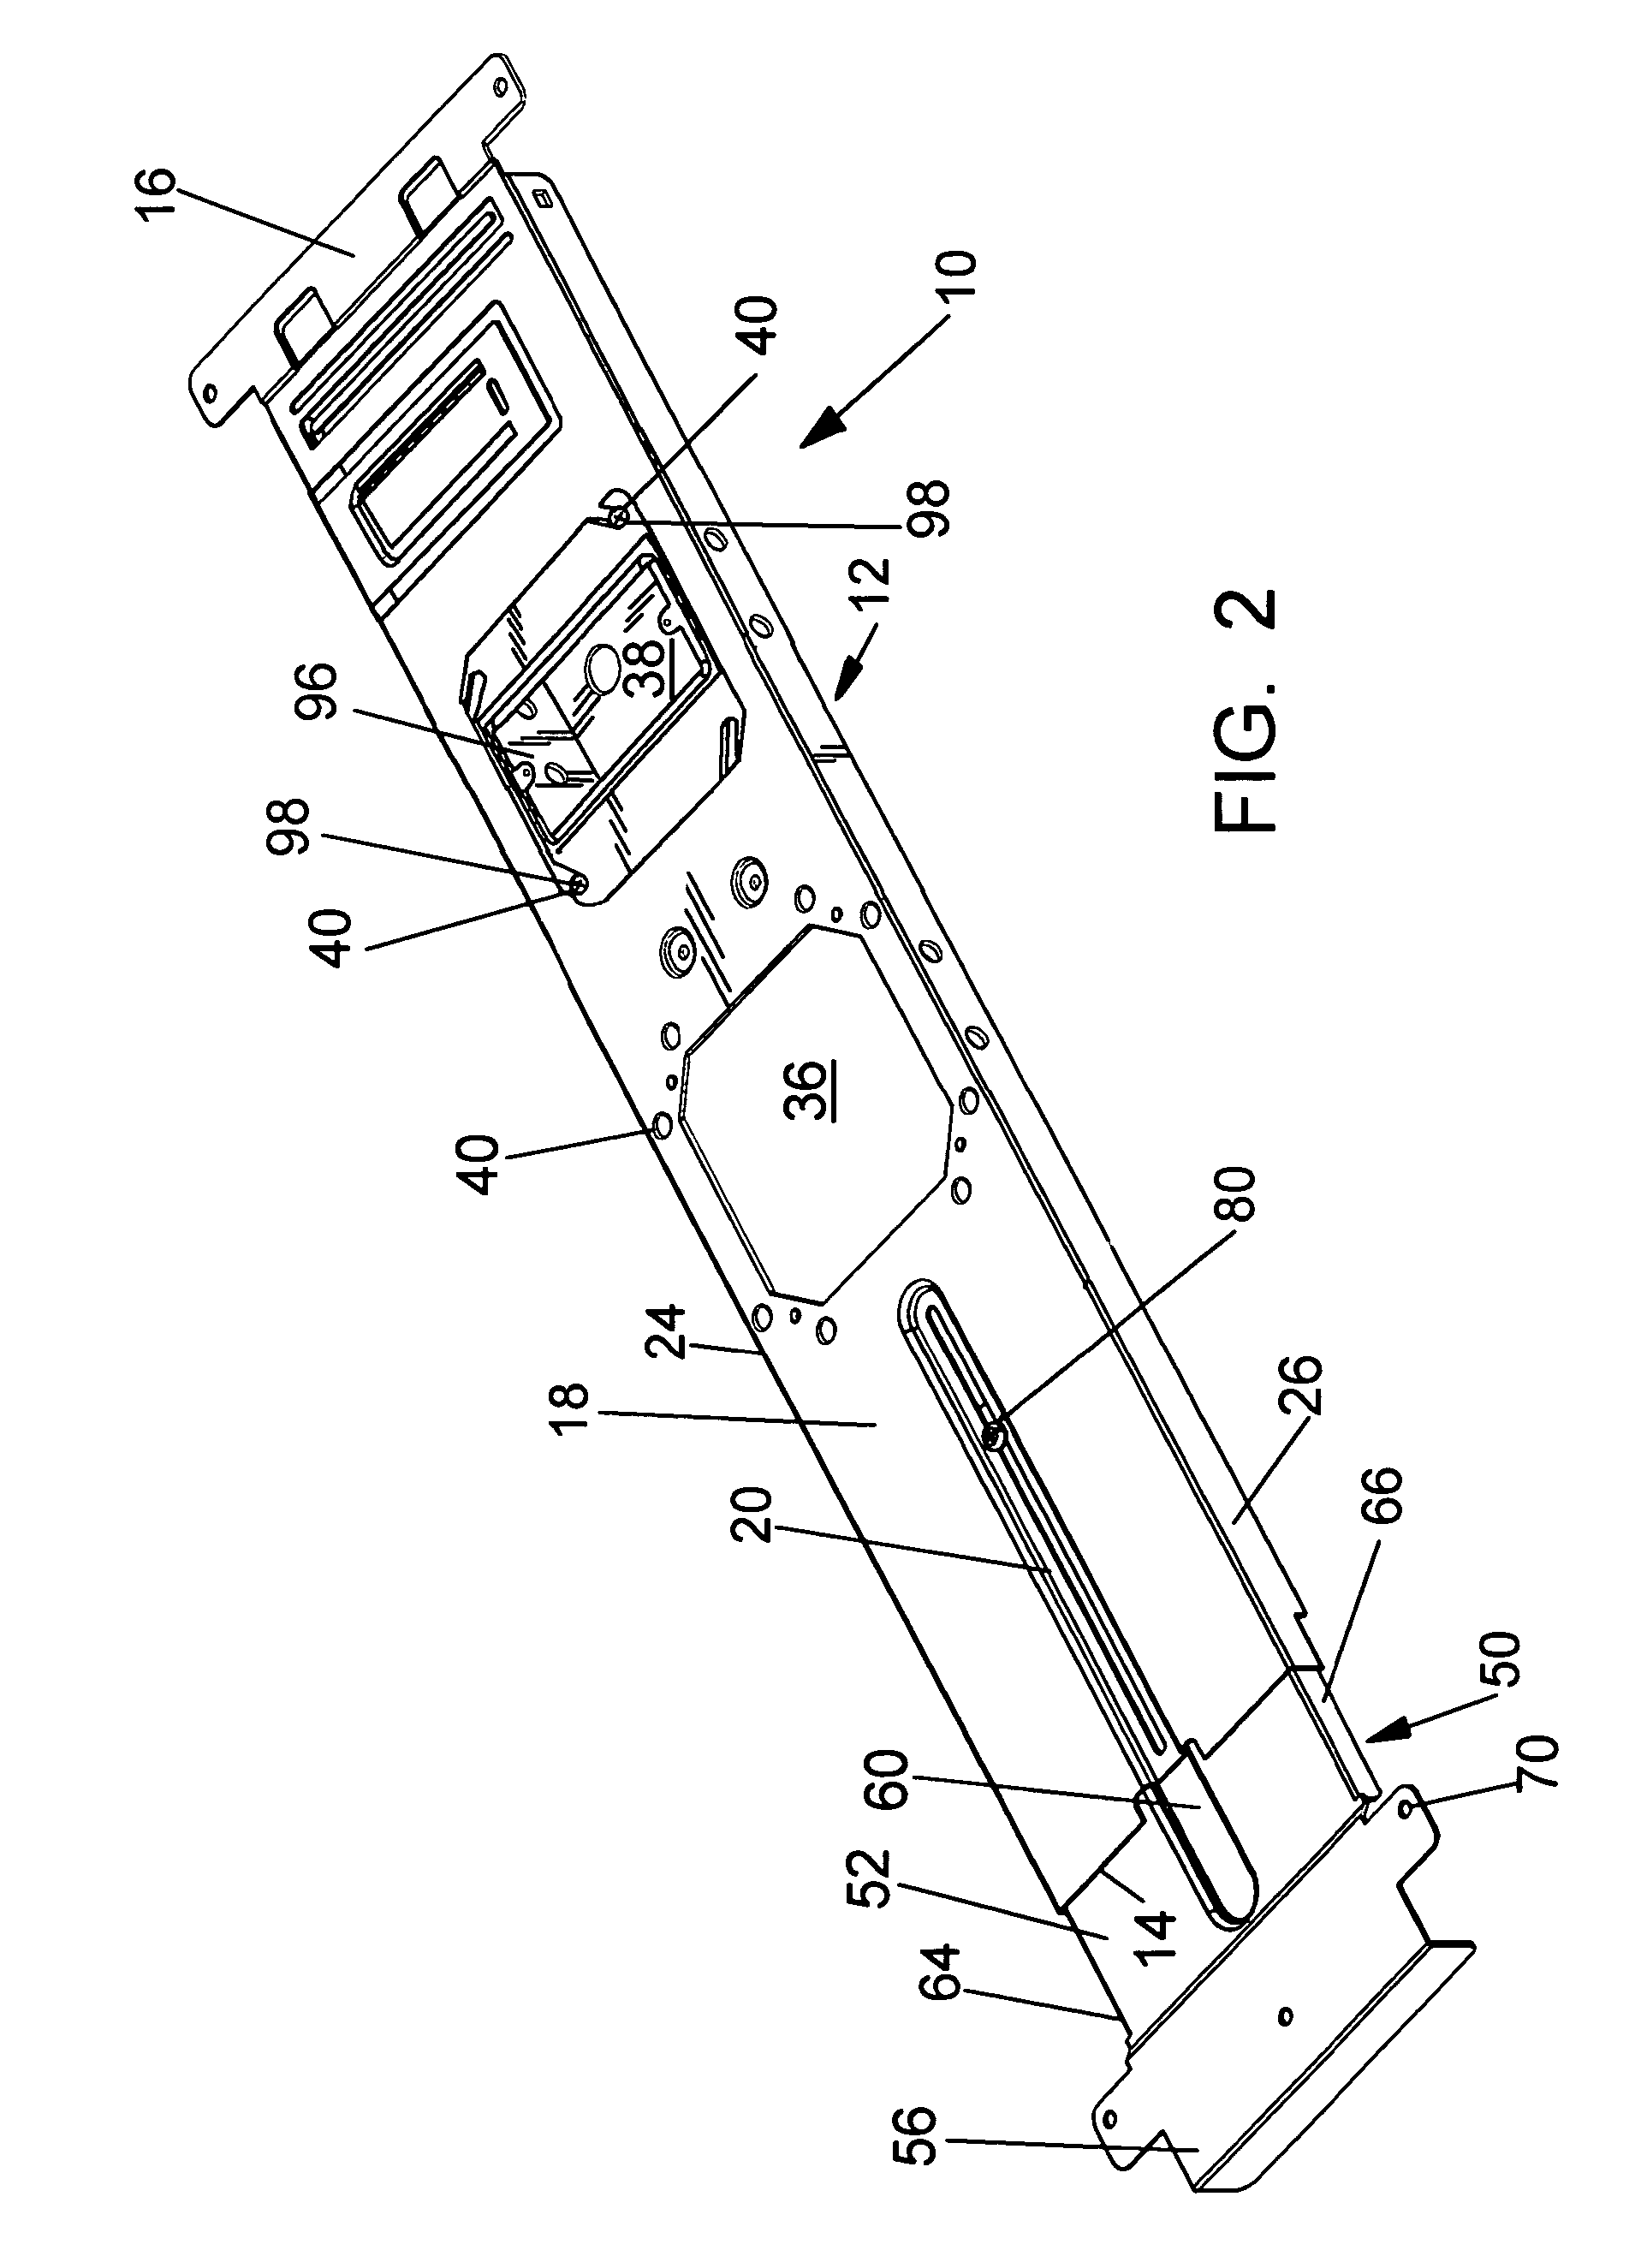 Adjustable mounting bracket assembly for mounting an electrical box